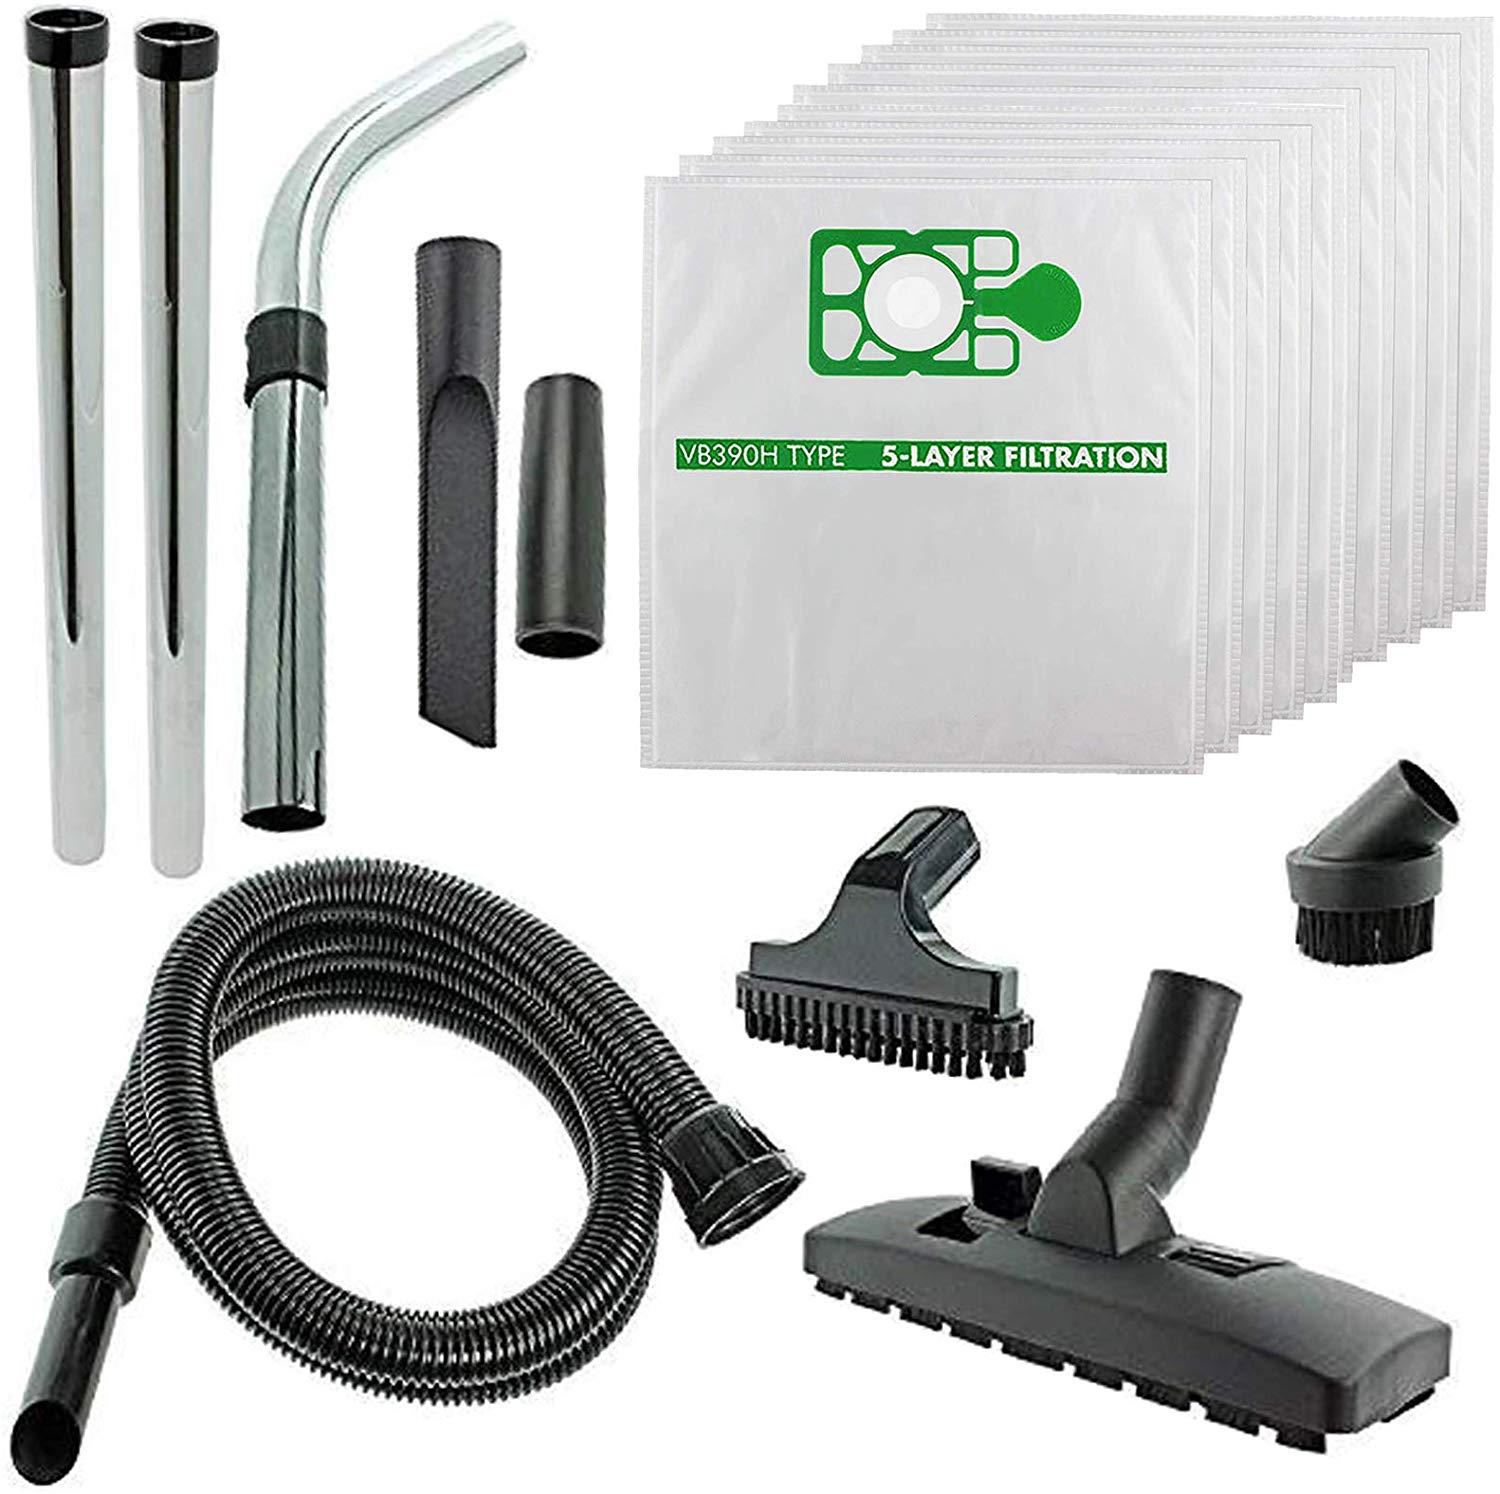 SPARES2GO Complete 2.5m Spare Parts Tool Kit + 10 Dust Bags for Numatic Henry Hetty James Vacuum Cleaner